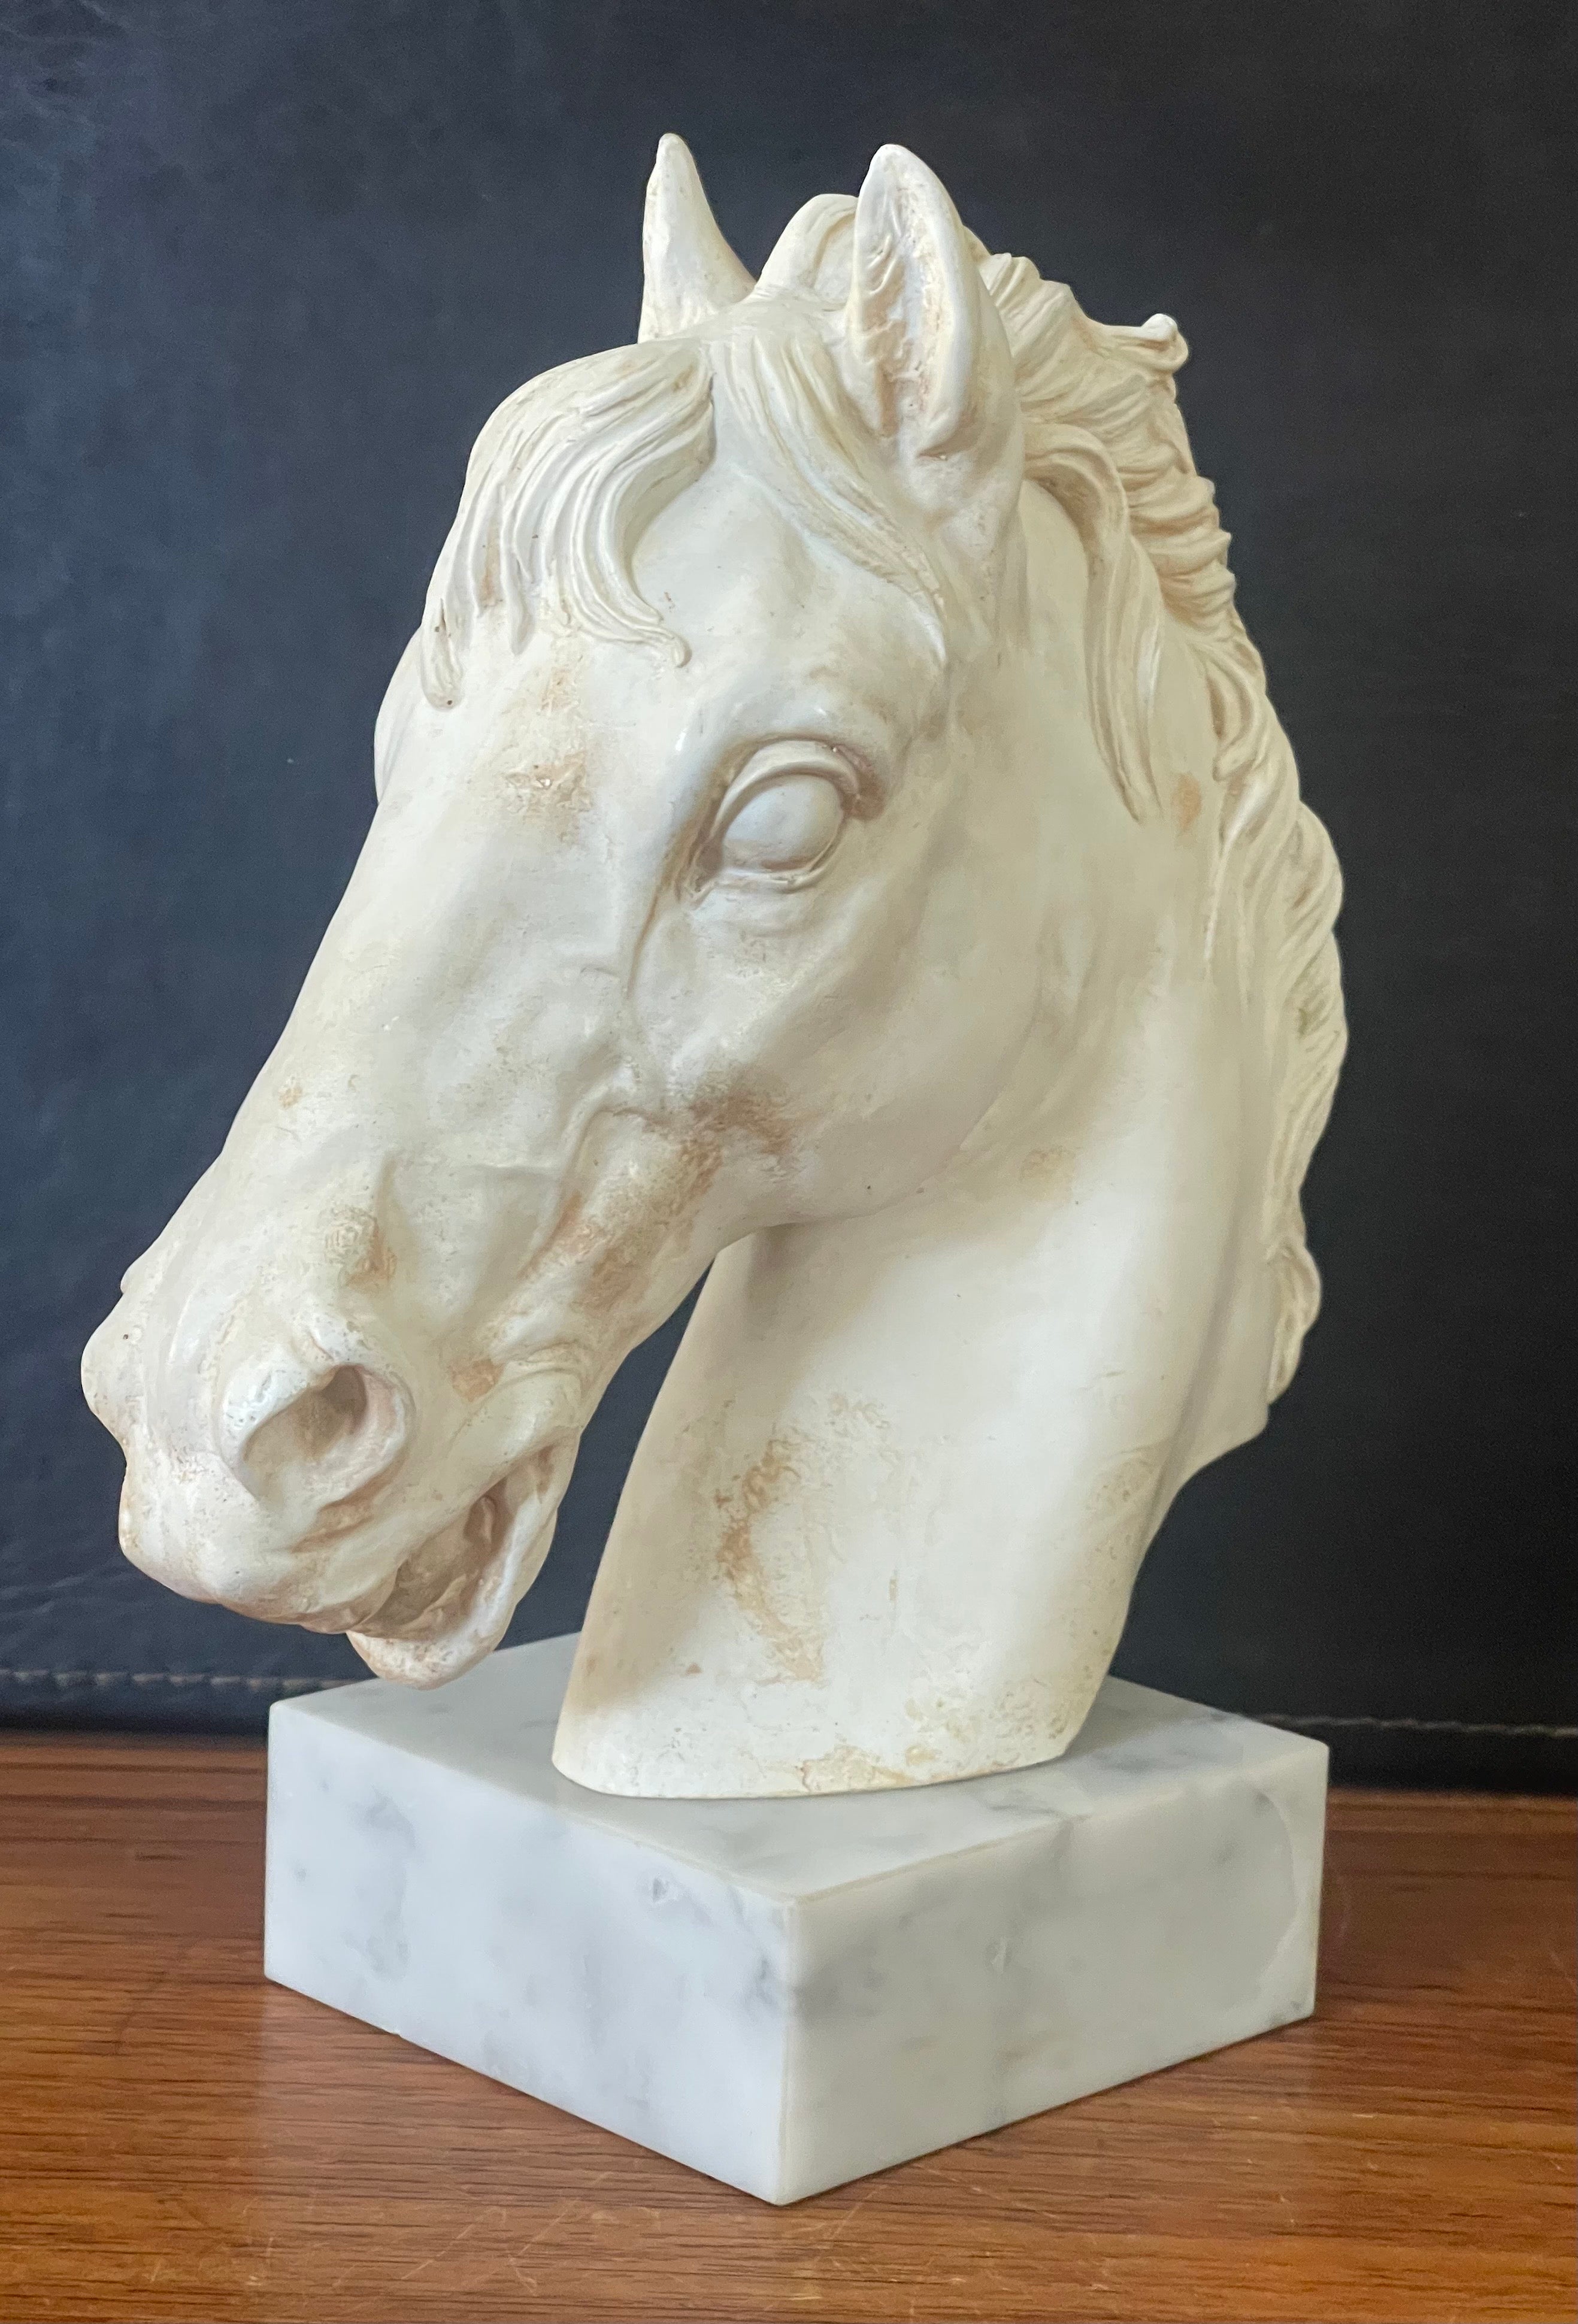 A very stylish horse head sculpture on an white marble base made in Italy, circa 1970s. The piece is in very good vintage condition and measures 4